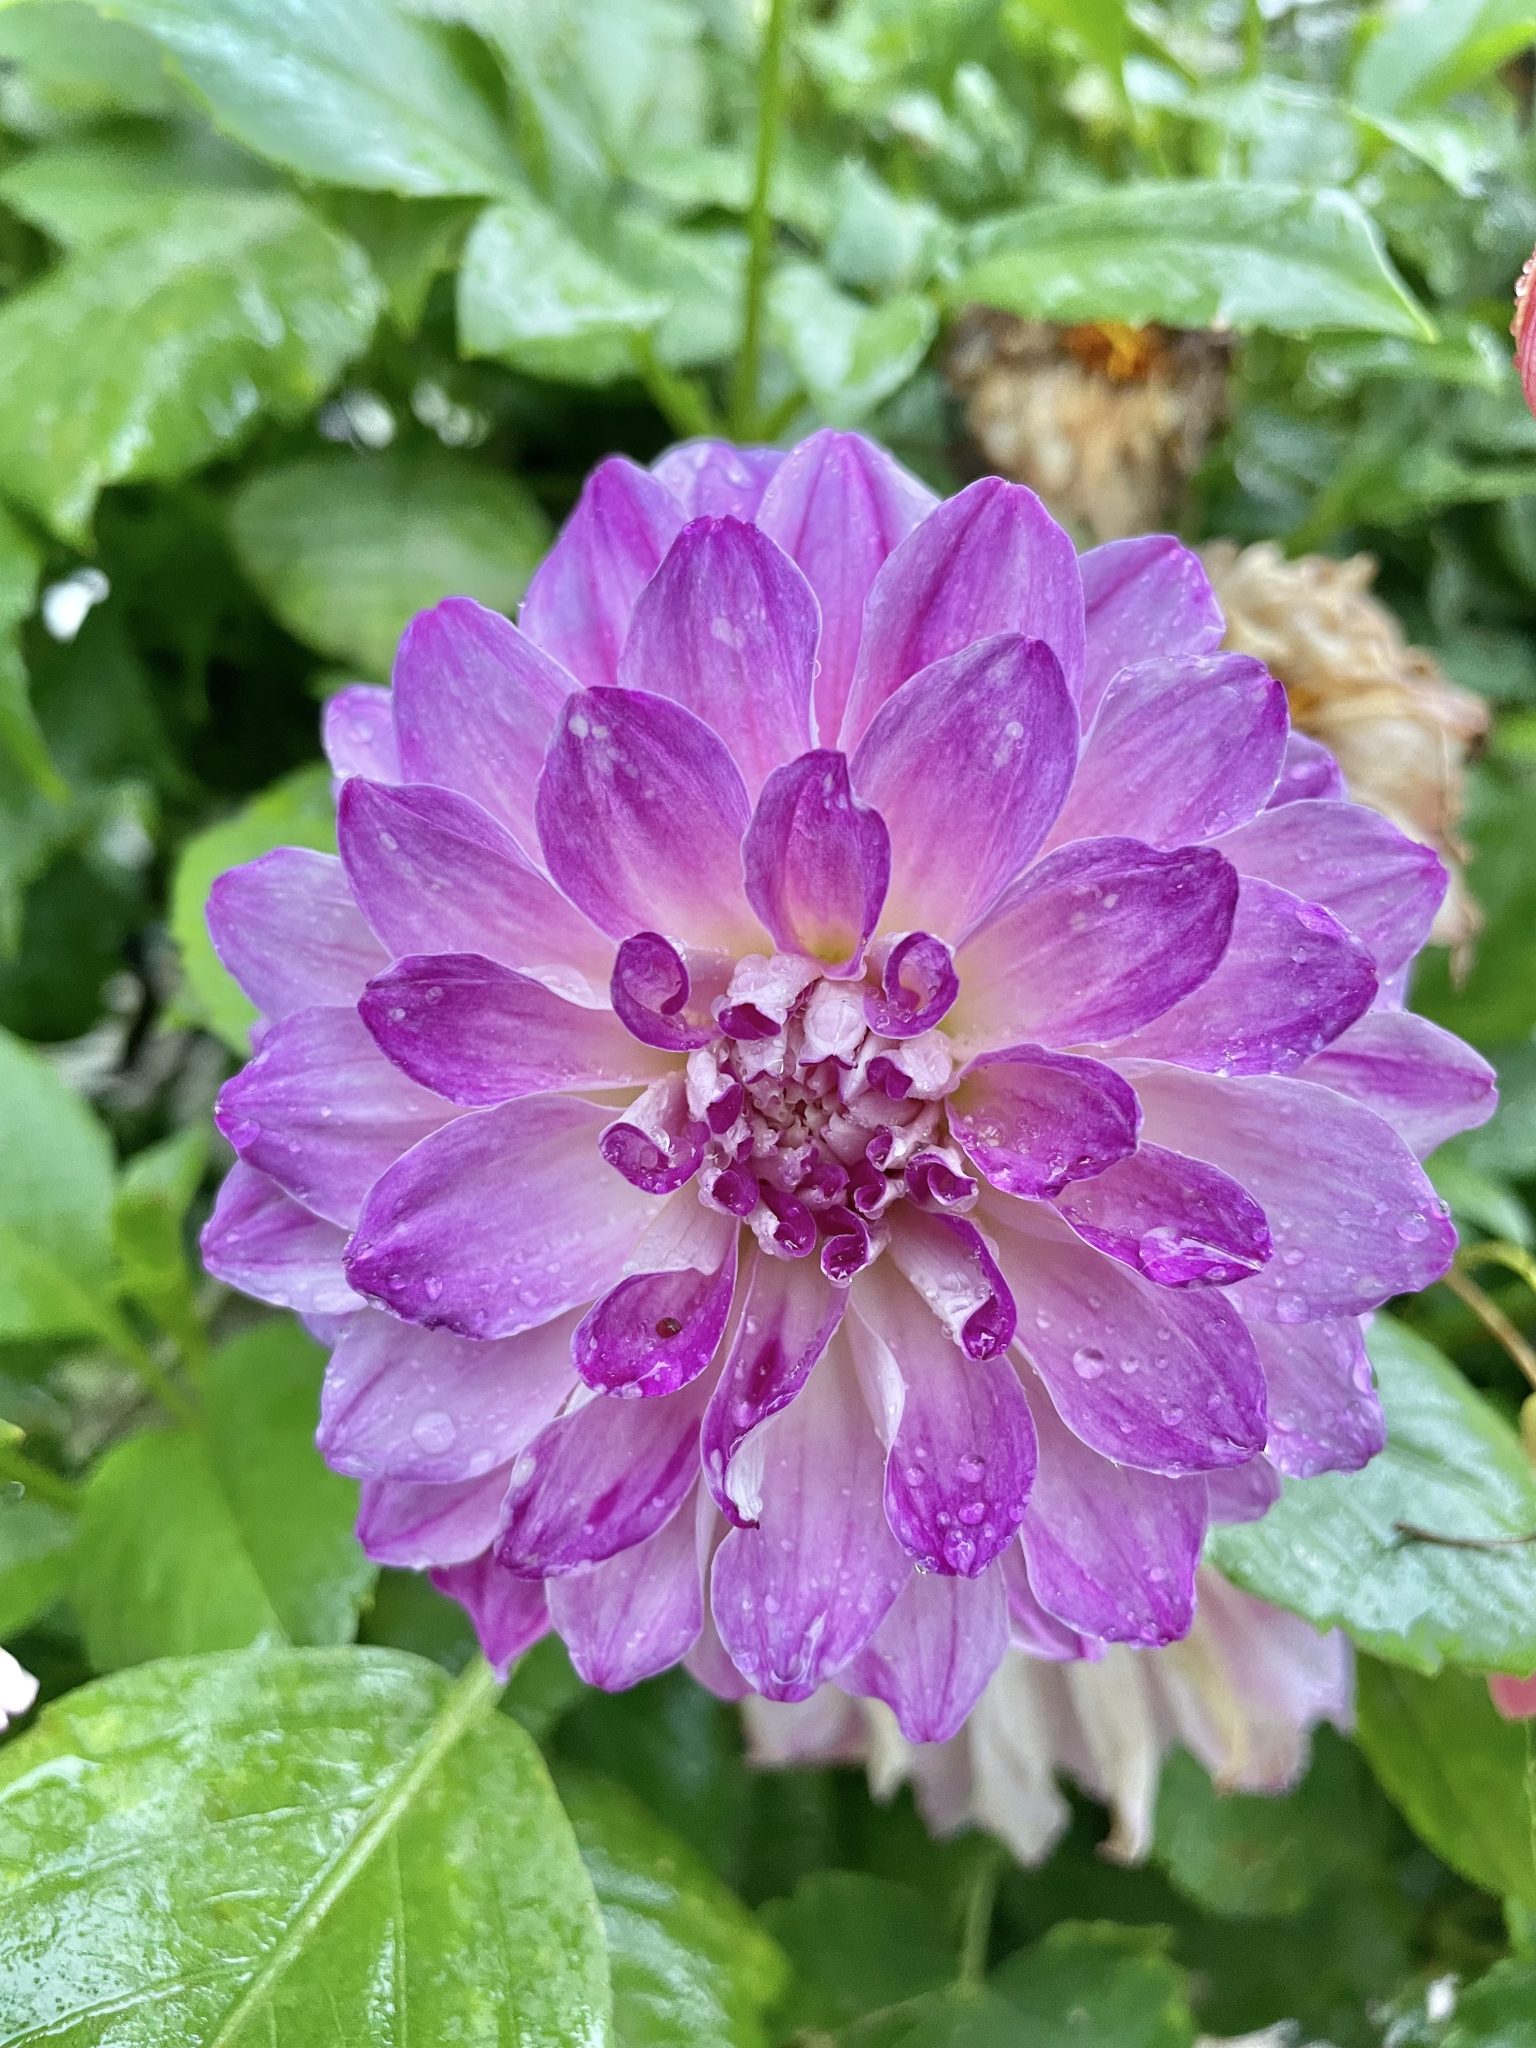 Dahlia Flower after a drizzle. From Sarangkot, Pokhara, Nepal.